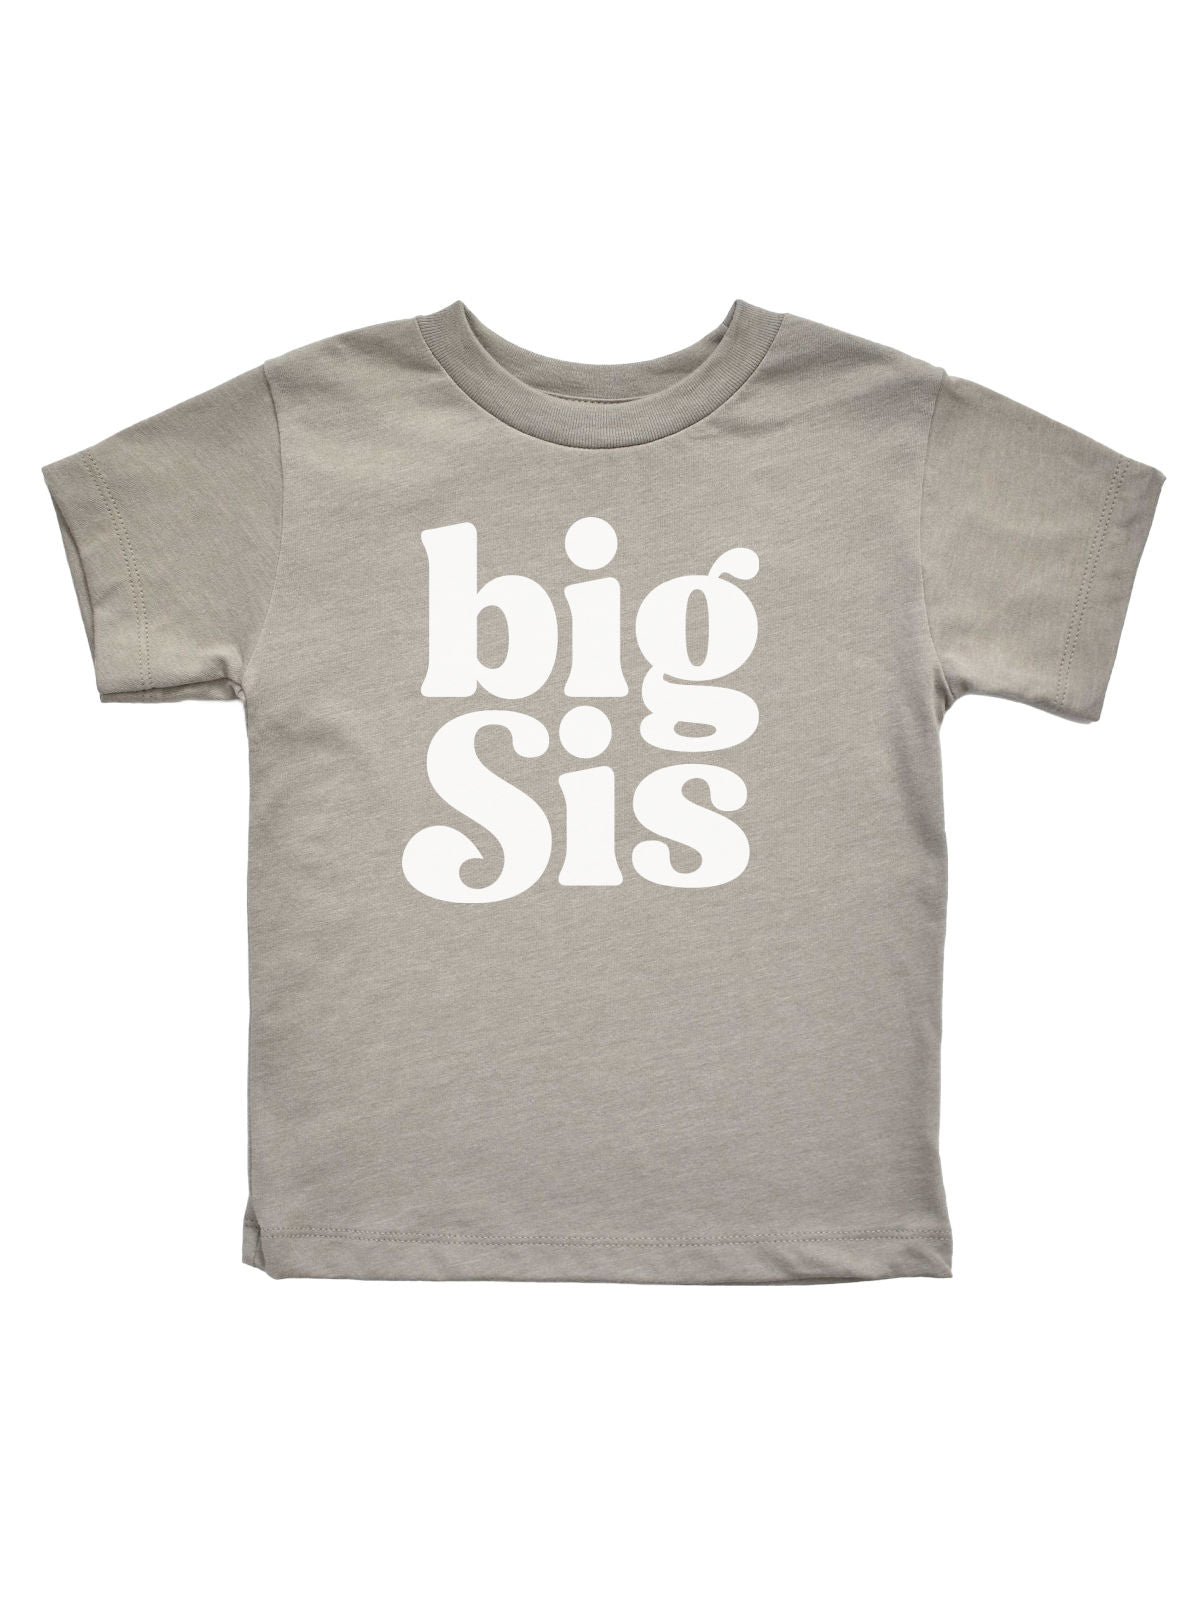 Big Sis Tee for Girls in Stone